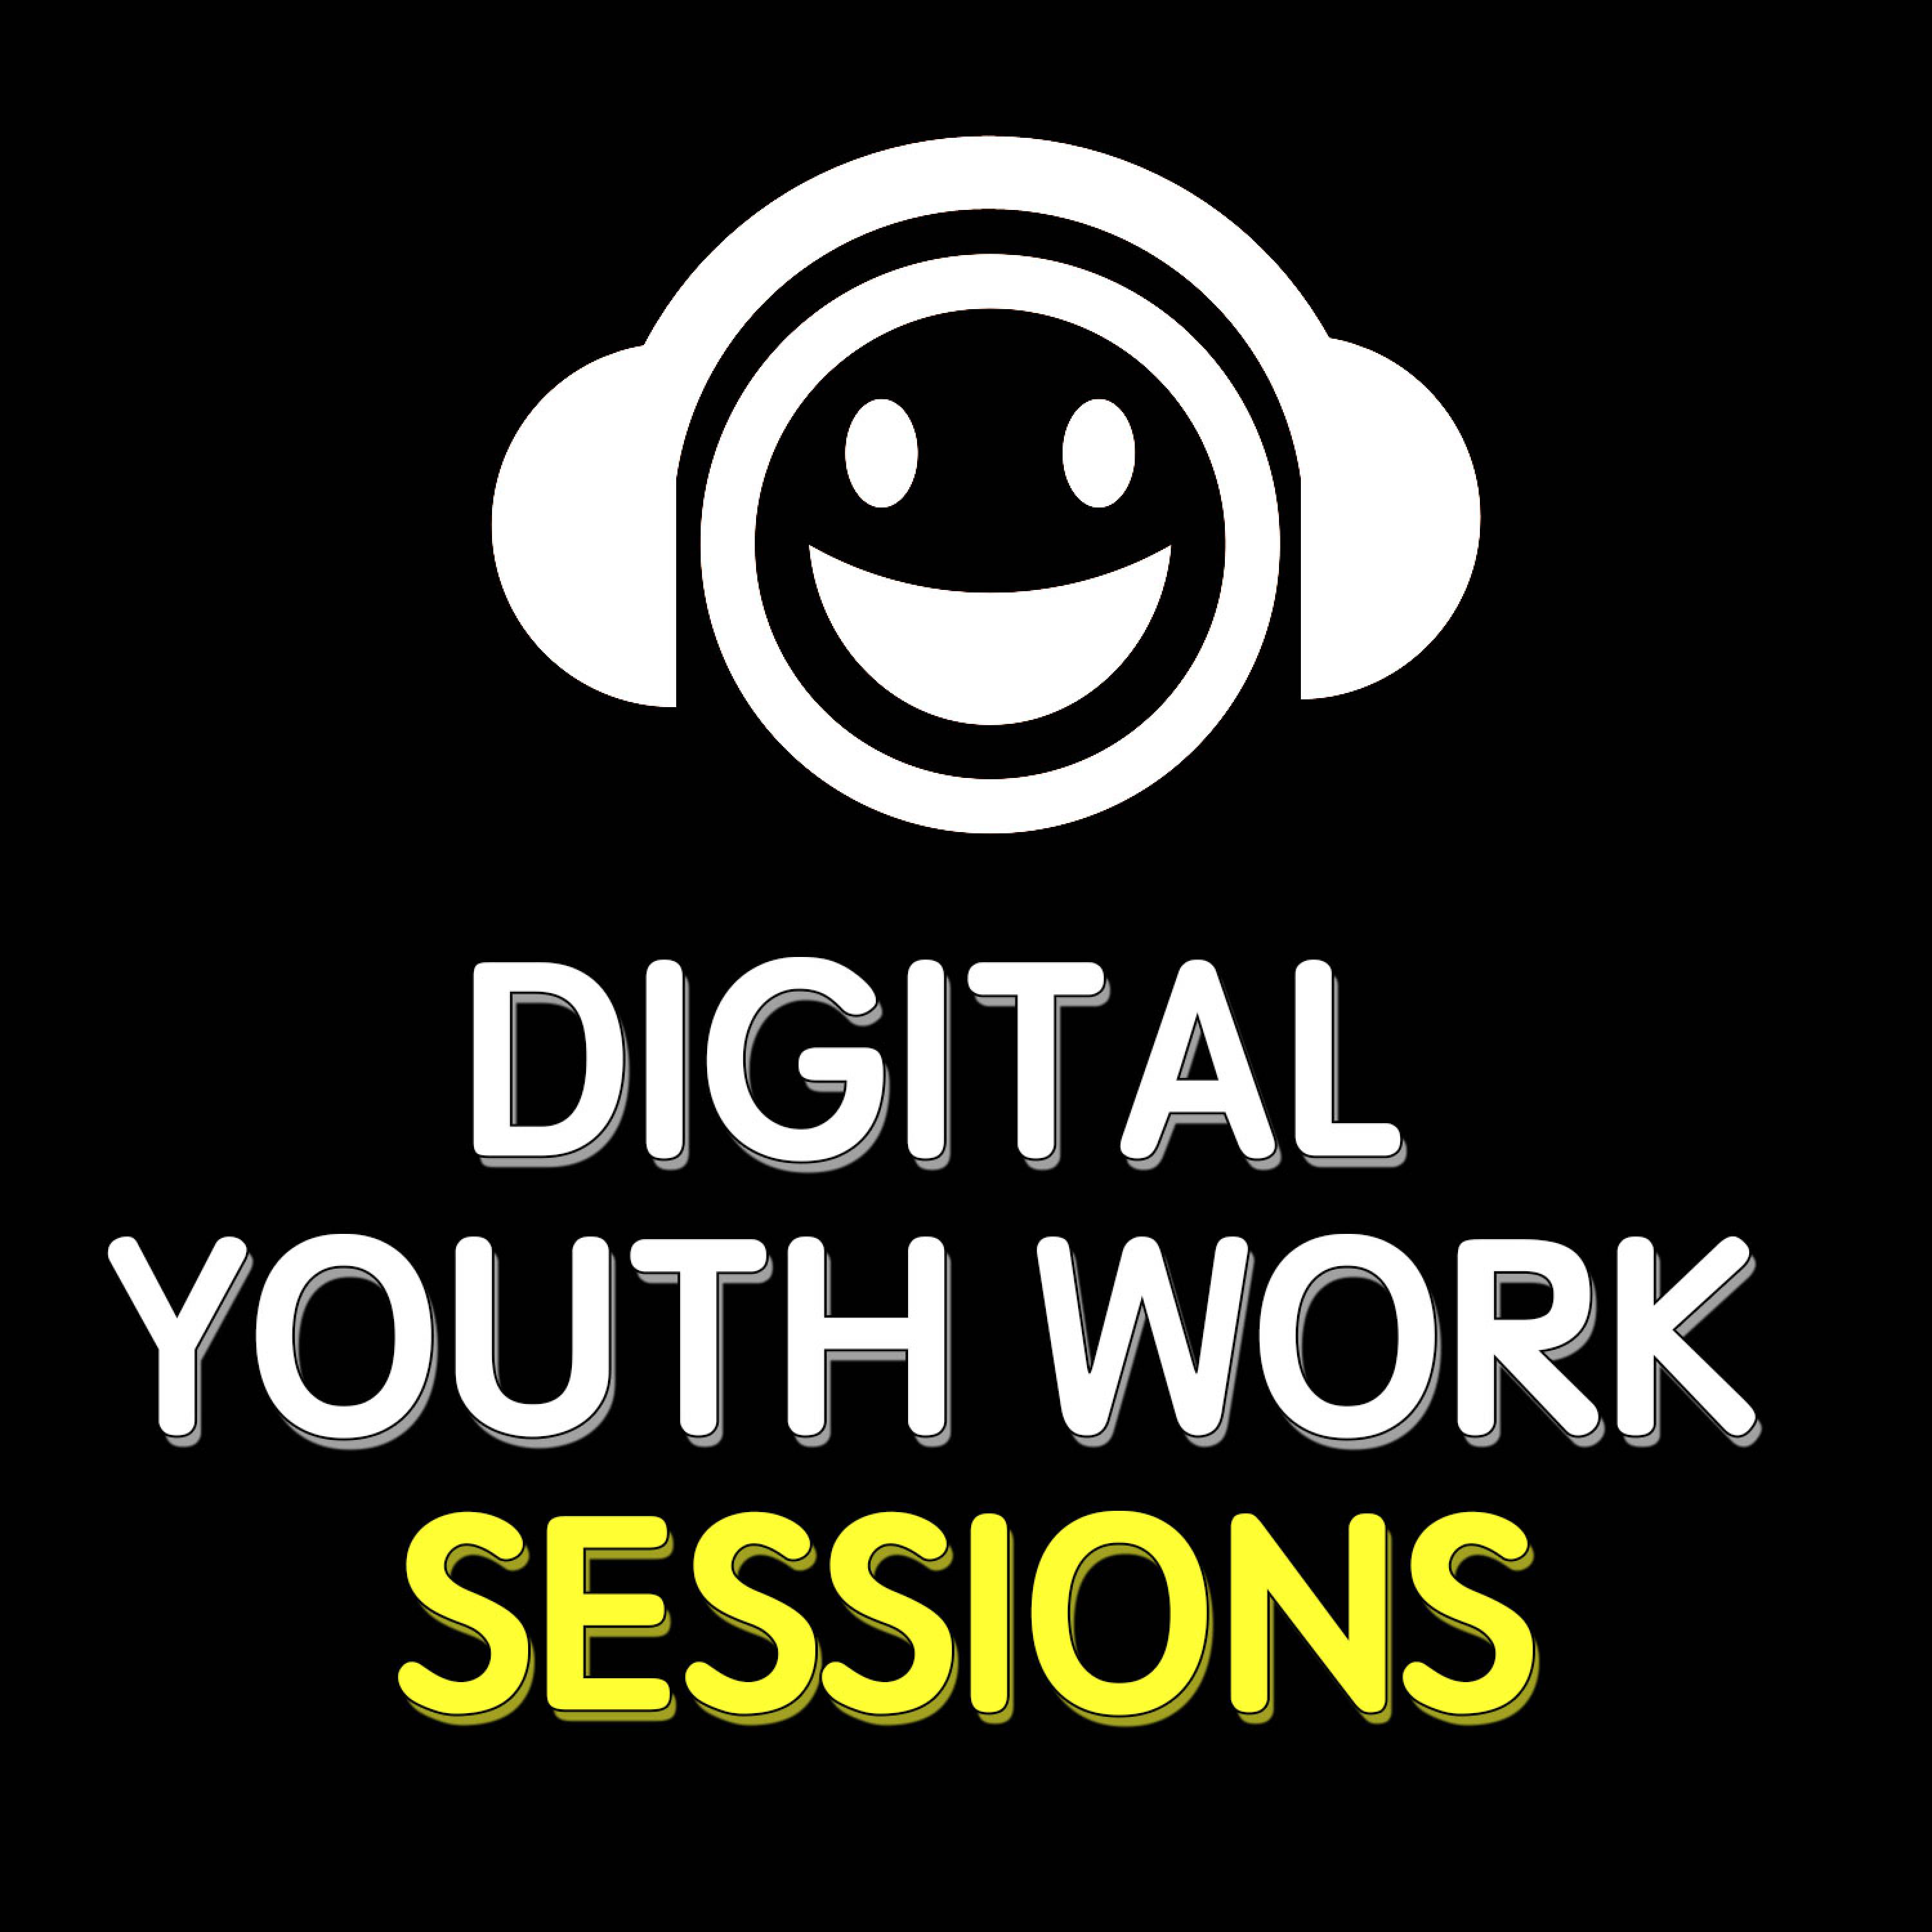 Digital youth work sessions